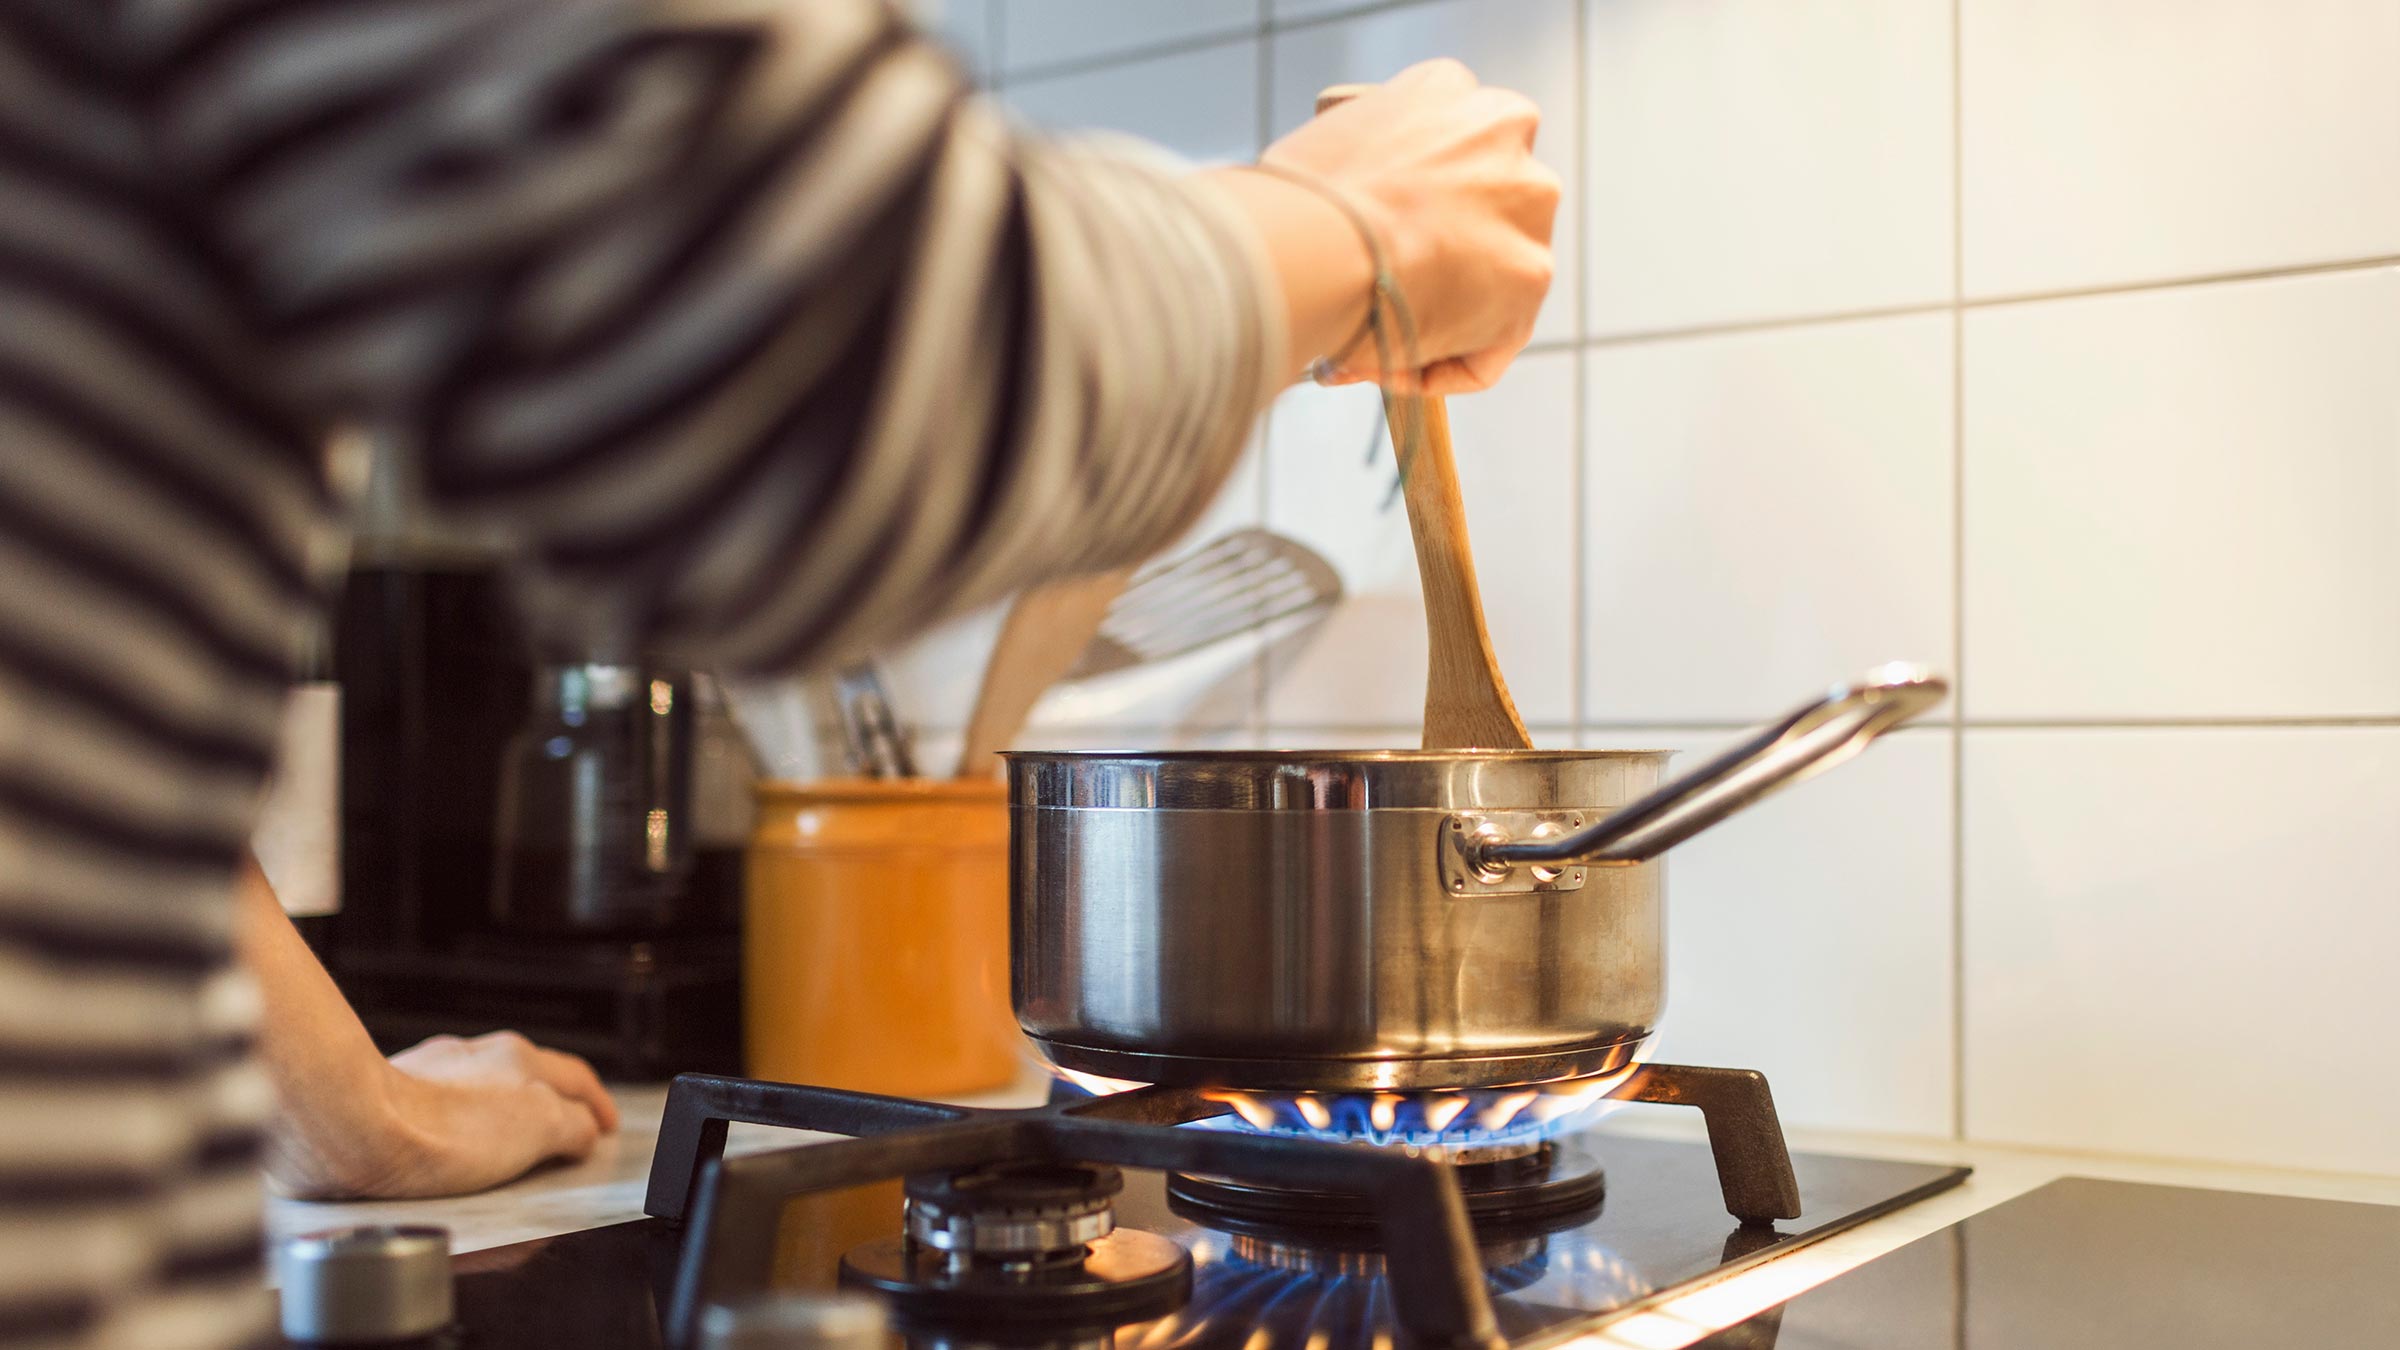 Best stove for your home: gas vs. electric